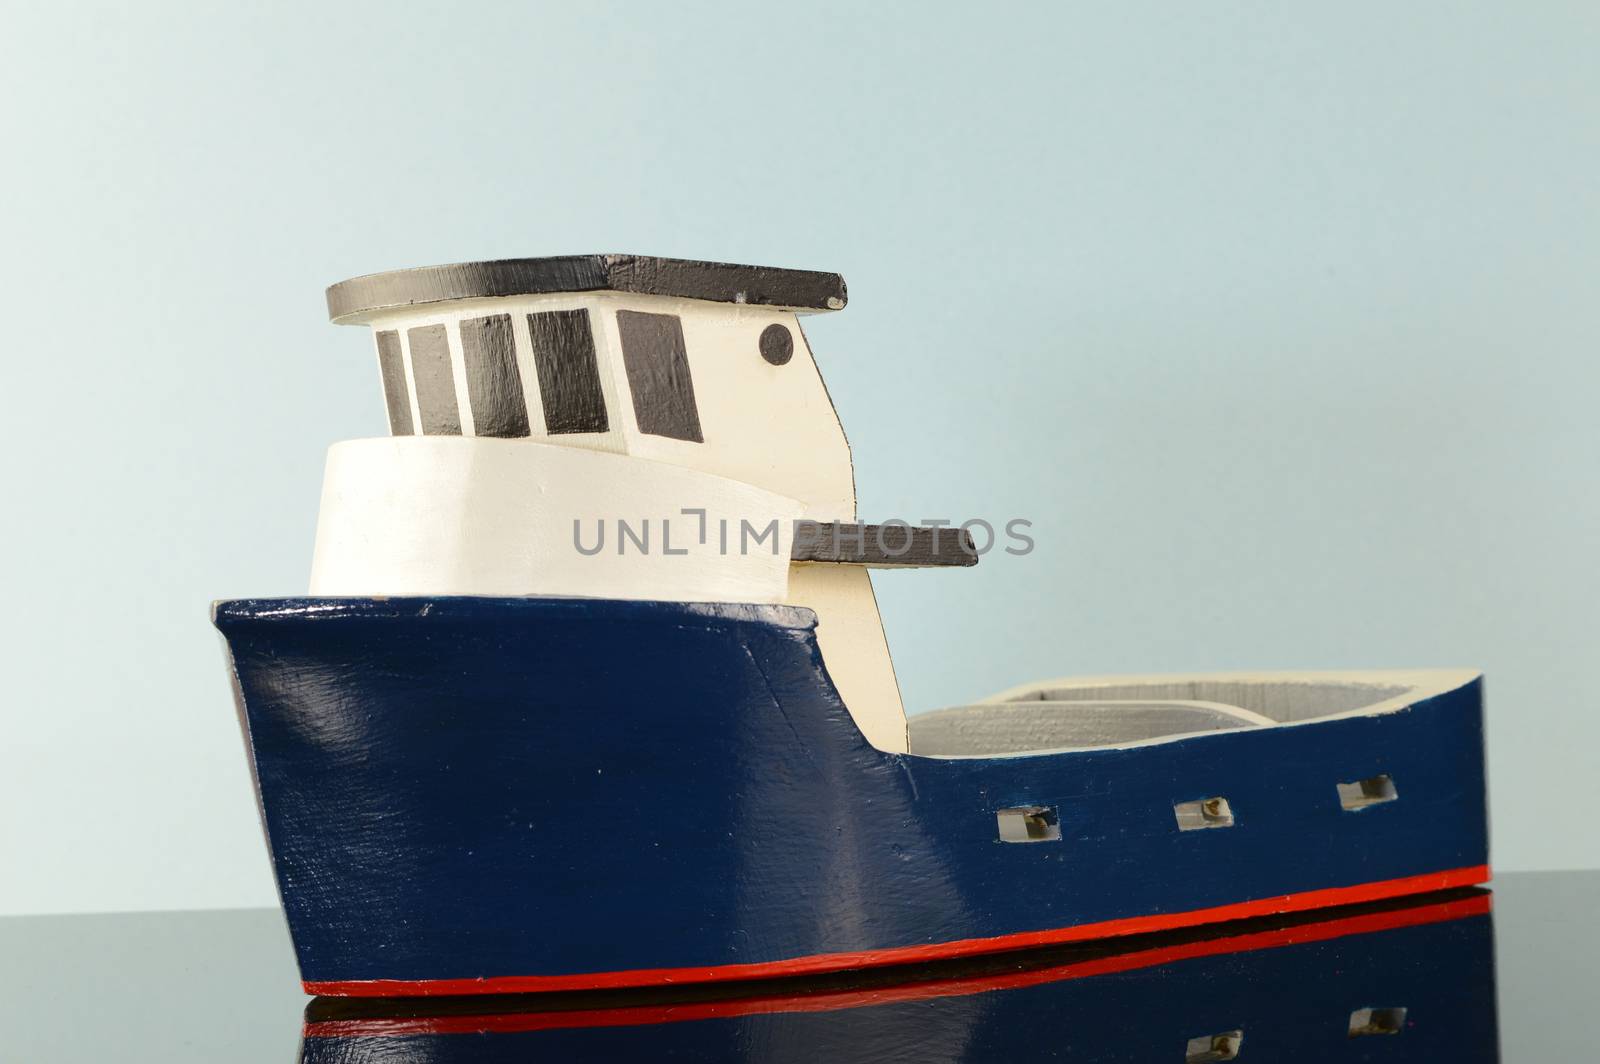 A closeup view of a blue tug boat on the reflected water surface.